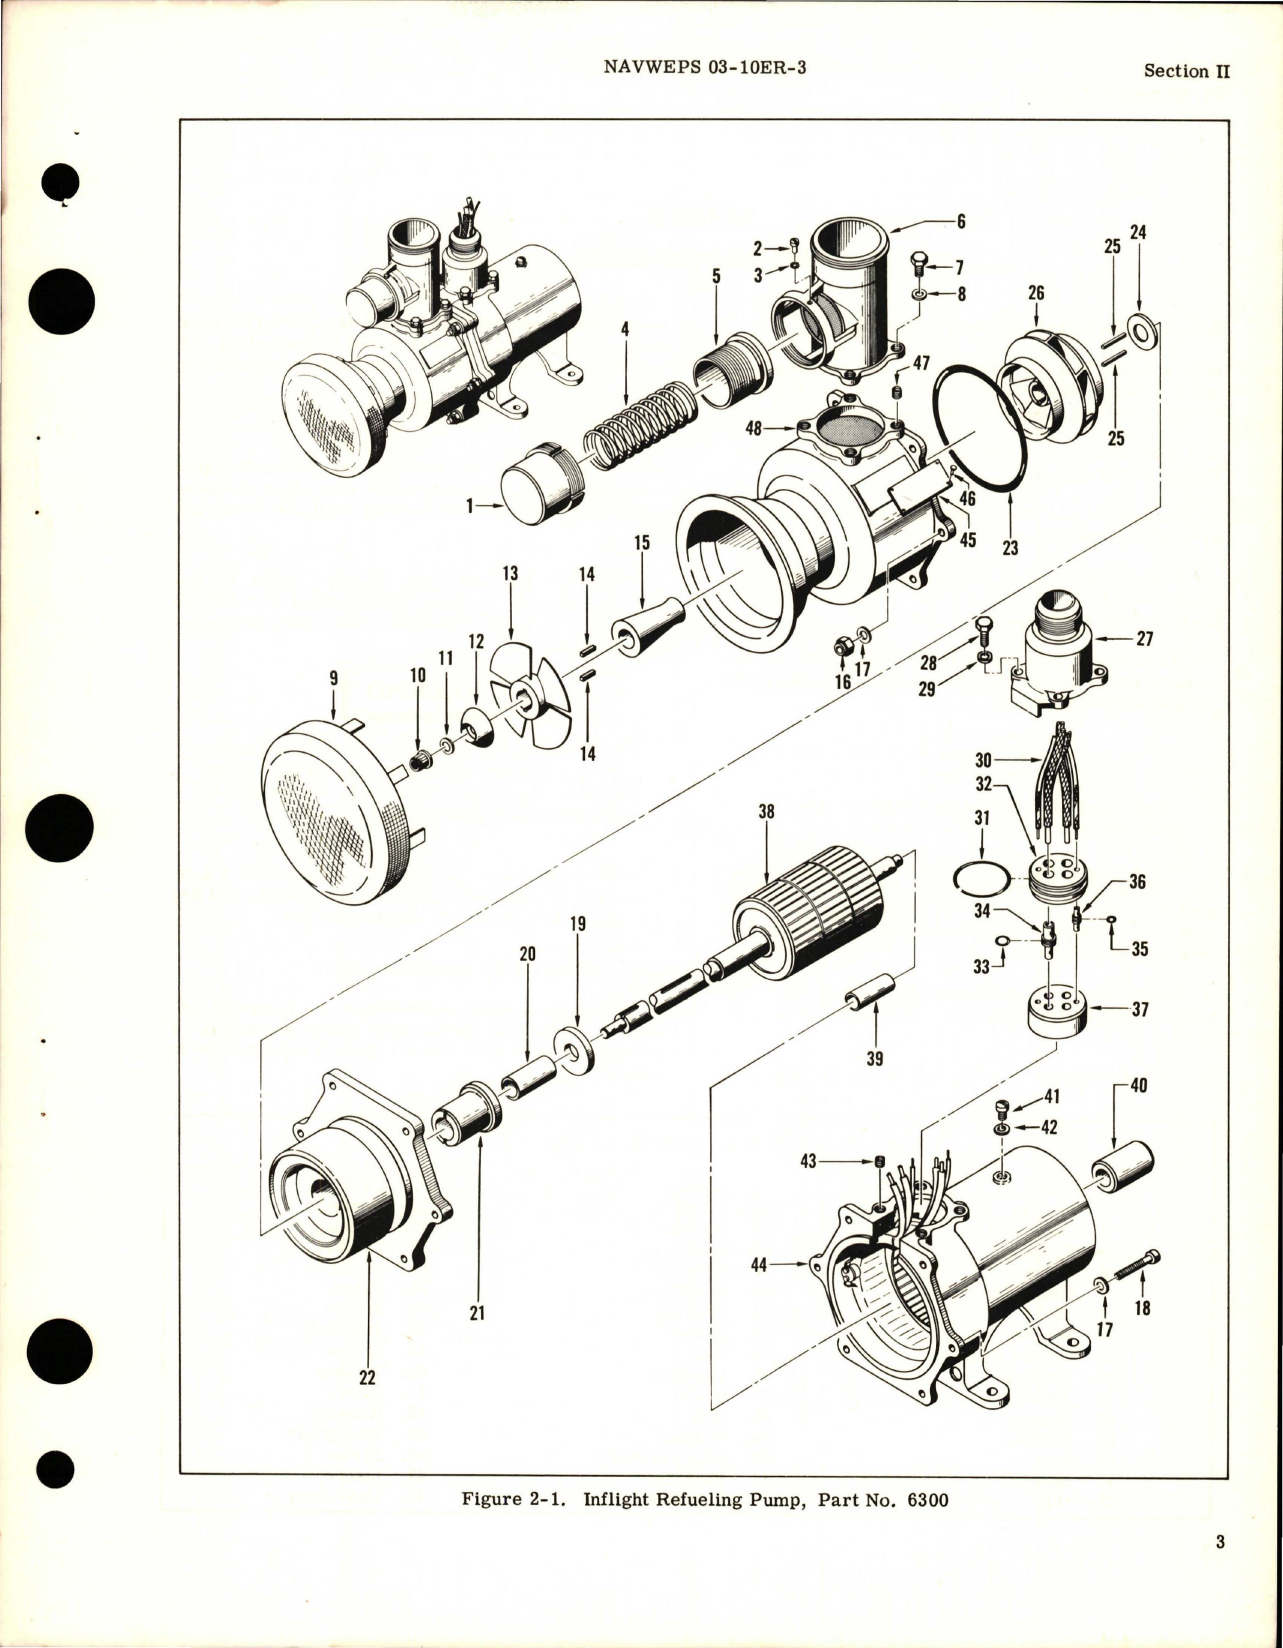 Sample page 7 from AirCorps Library document: Overhaul Instructions for Inflight Refueling Pump - Part 6300 and 6300-1